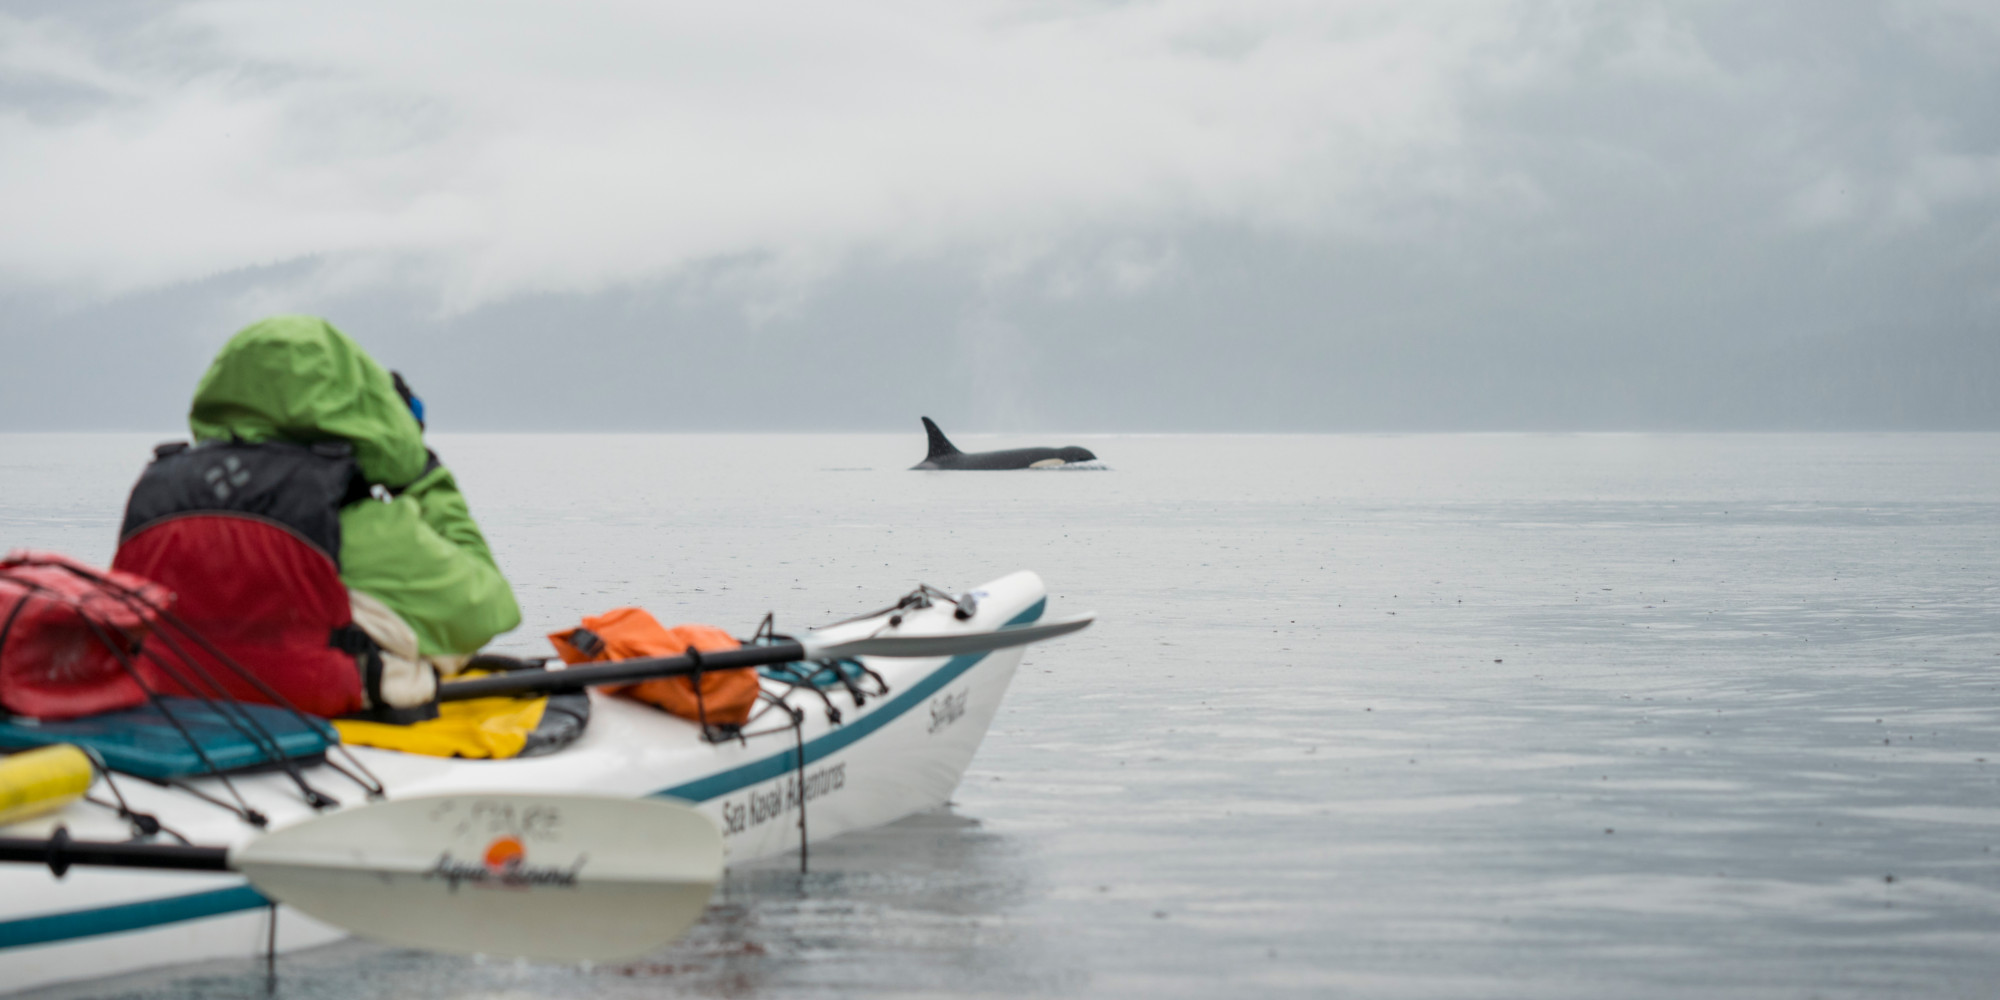 Person in a white kayak taking a picture of an orca whale breached out of the water in front of them in British Columbia